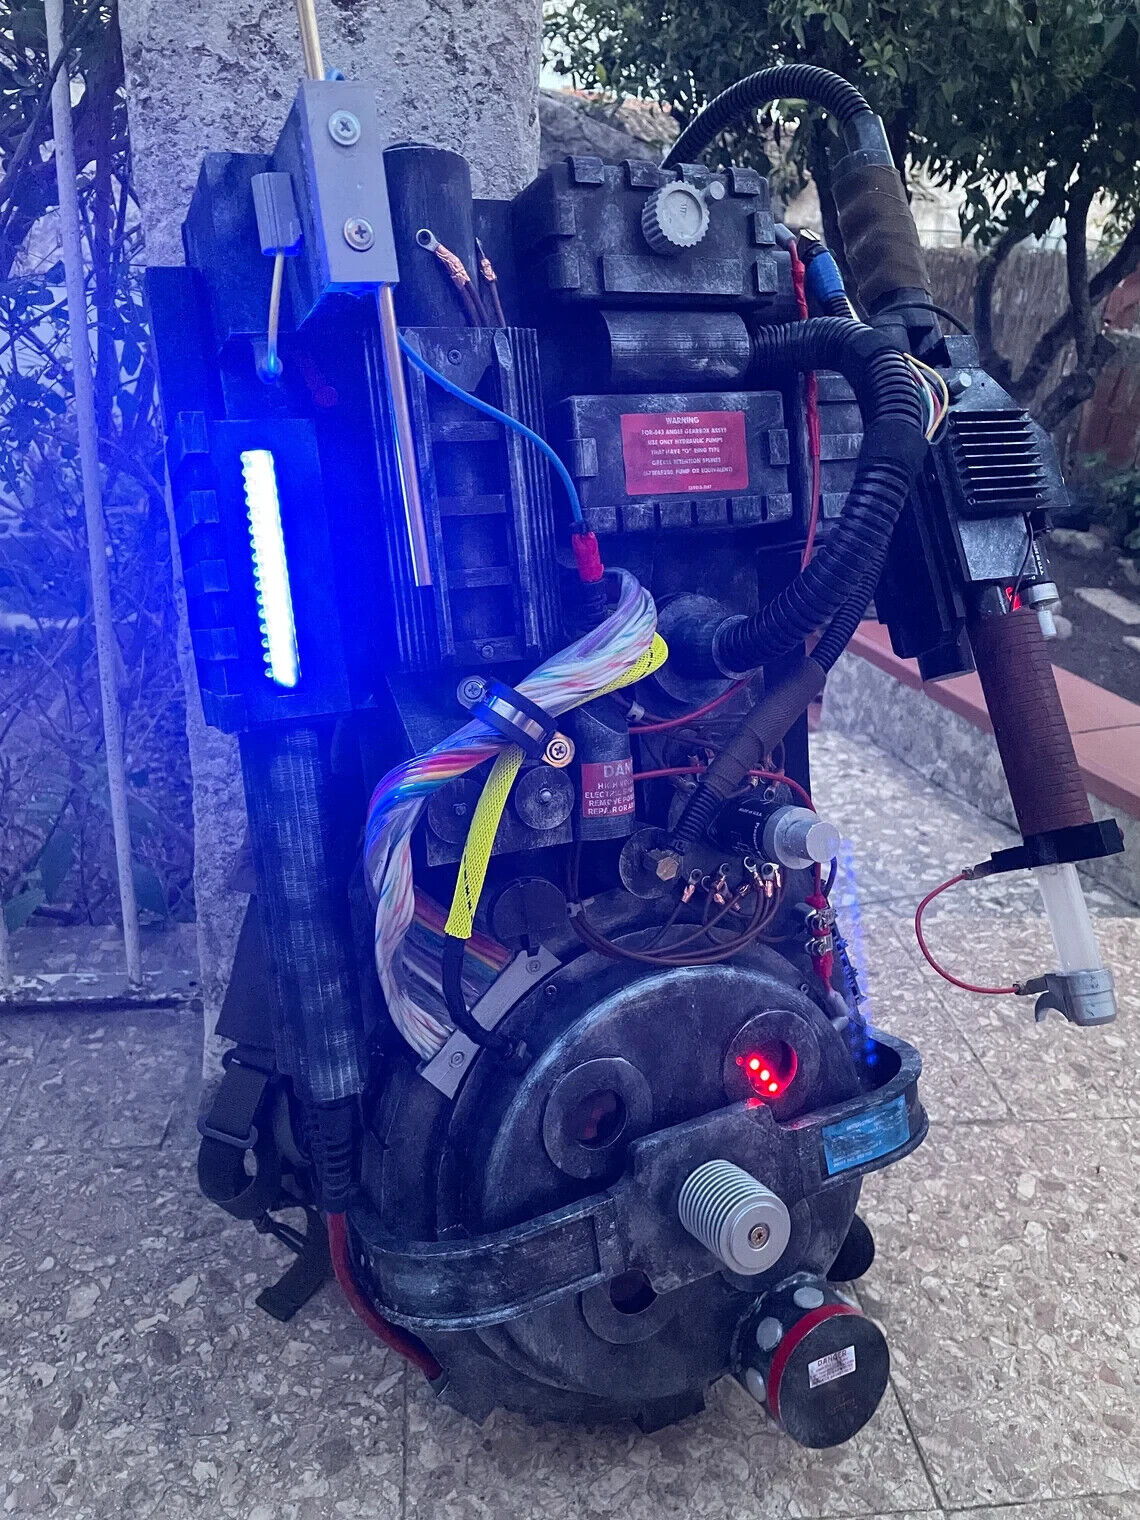 Ghostbusters zaino protonico proton pack afterlife (lights and sound)